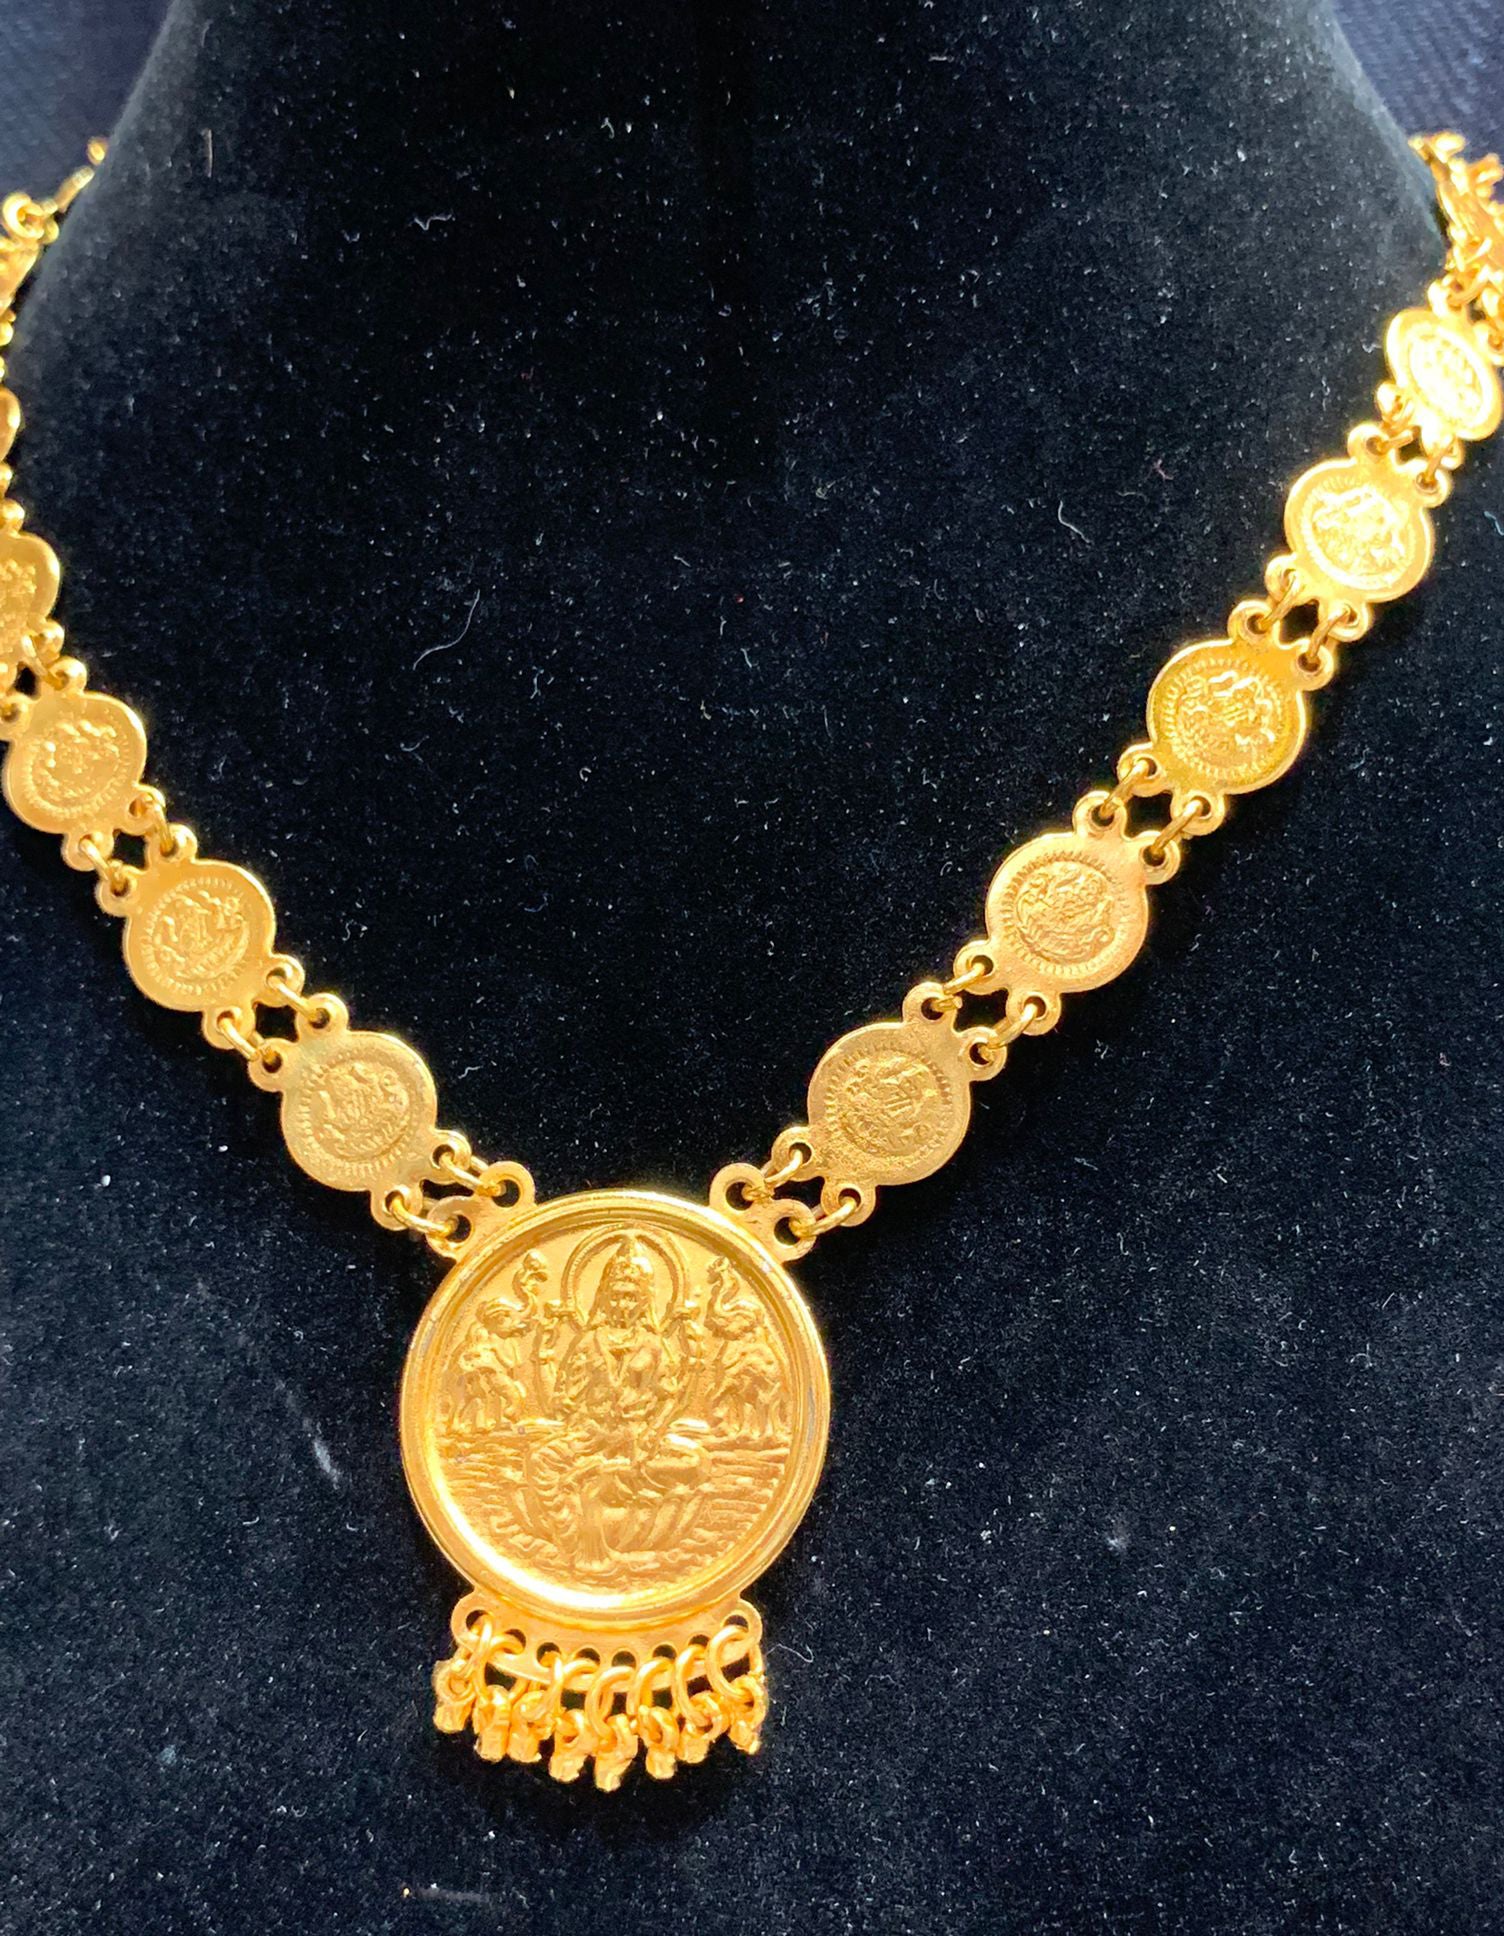 Gold Plated Coin Necklace